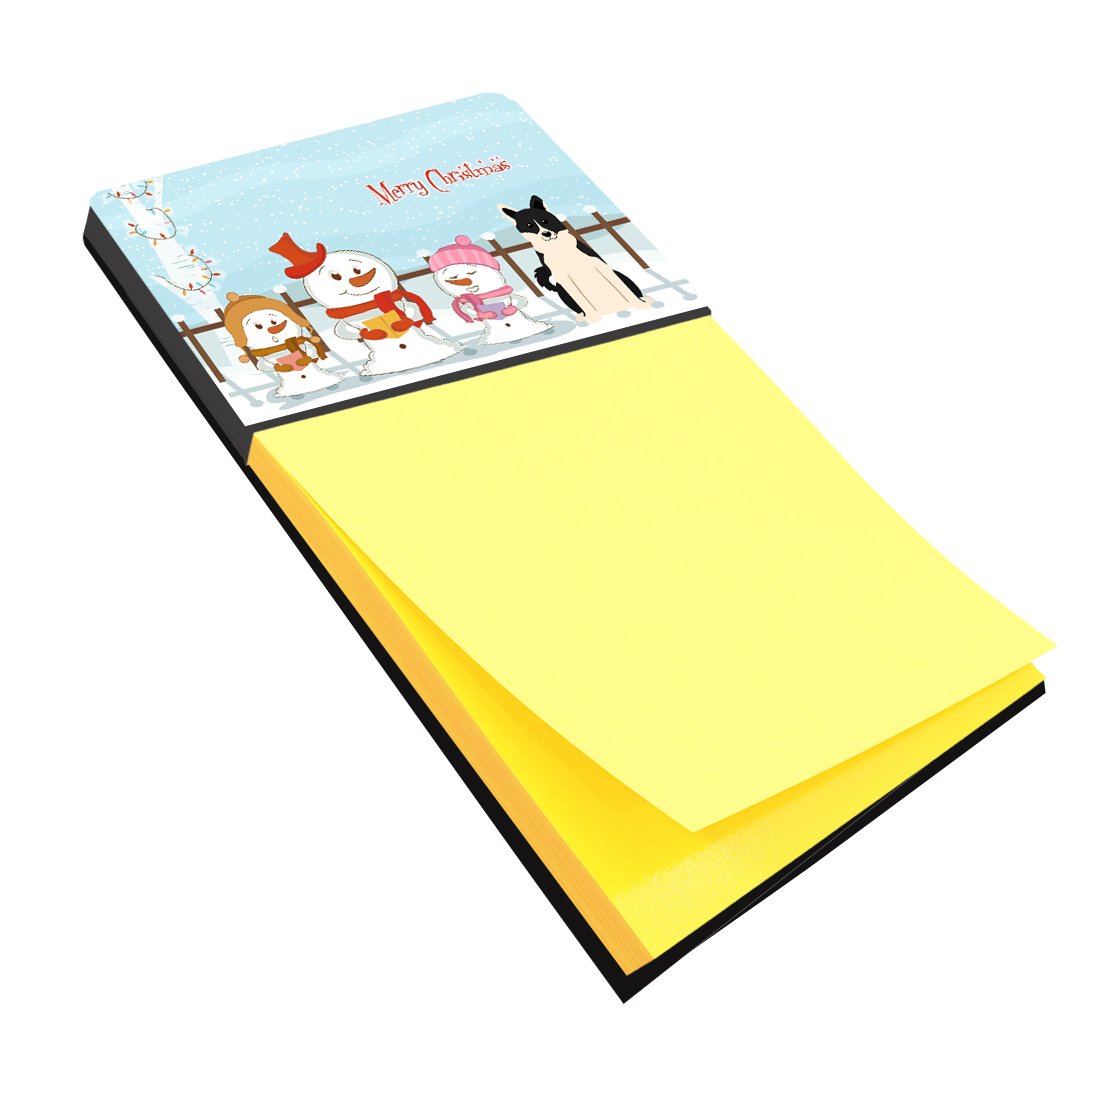 Merry Christmas Carolers Russo-European Laika Spitz Sticky Note Holder BB2360SN by Caroline's Treasures